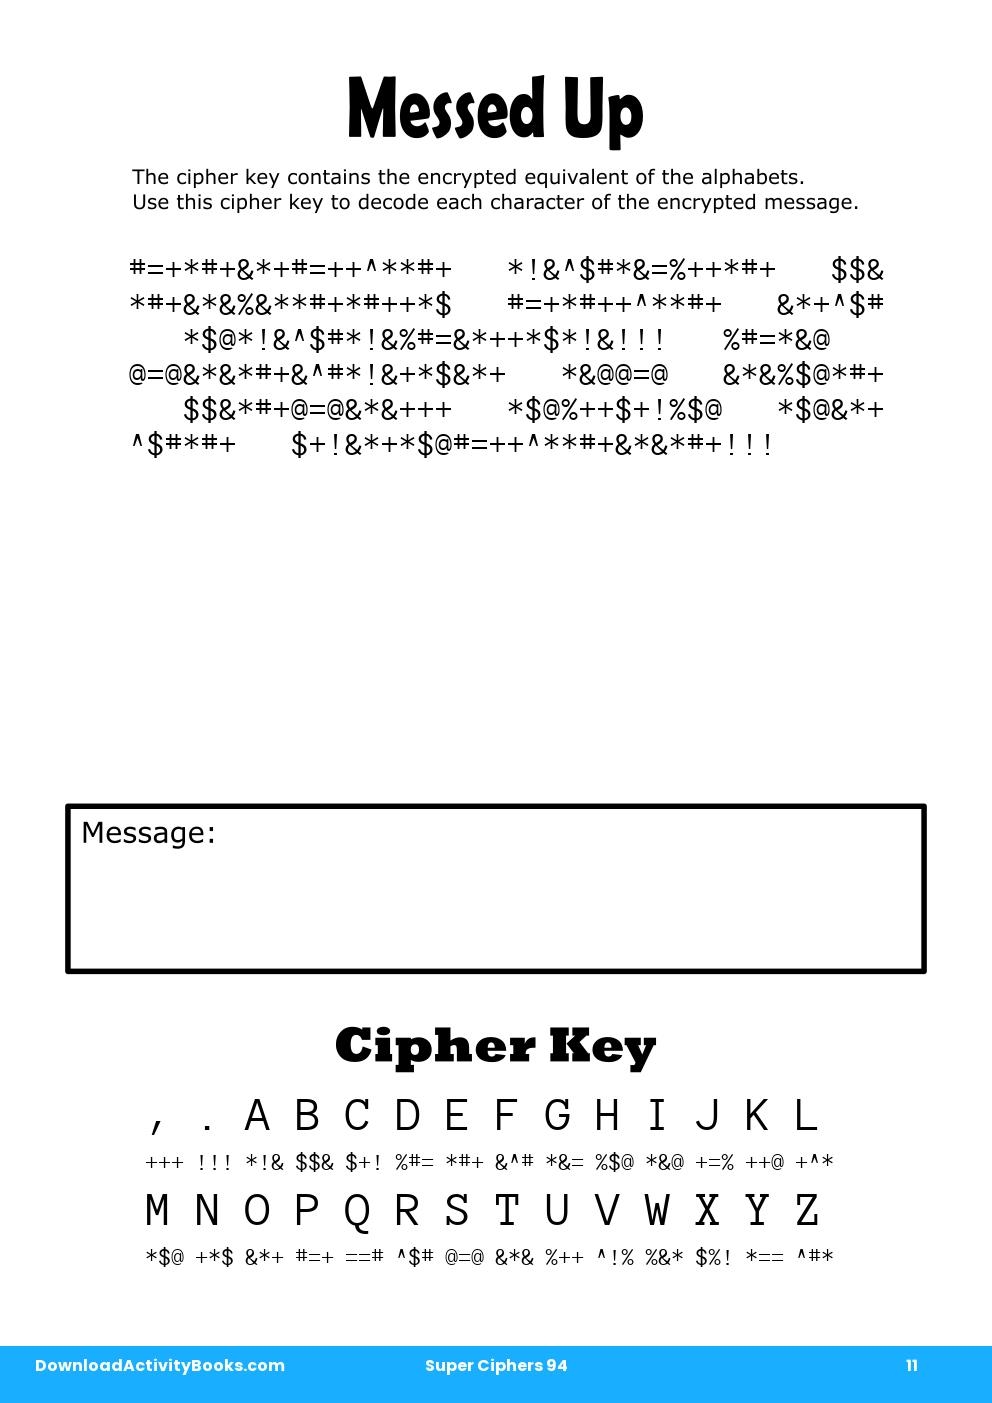 Messed Up in Super Ciphers 94